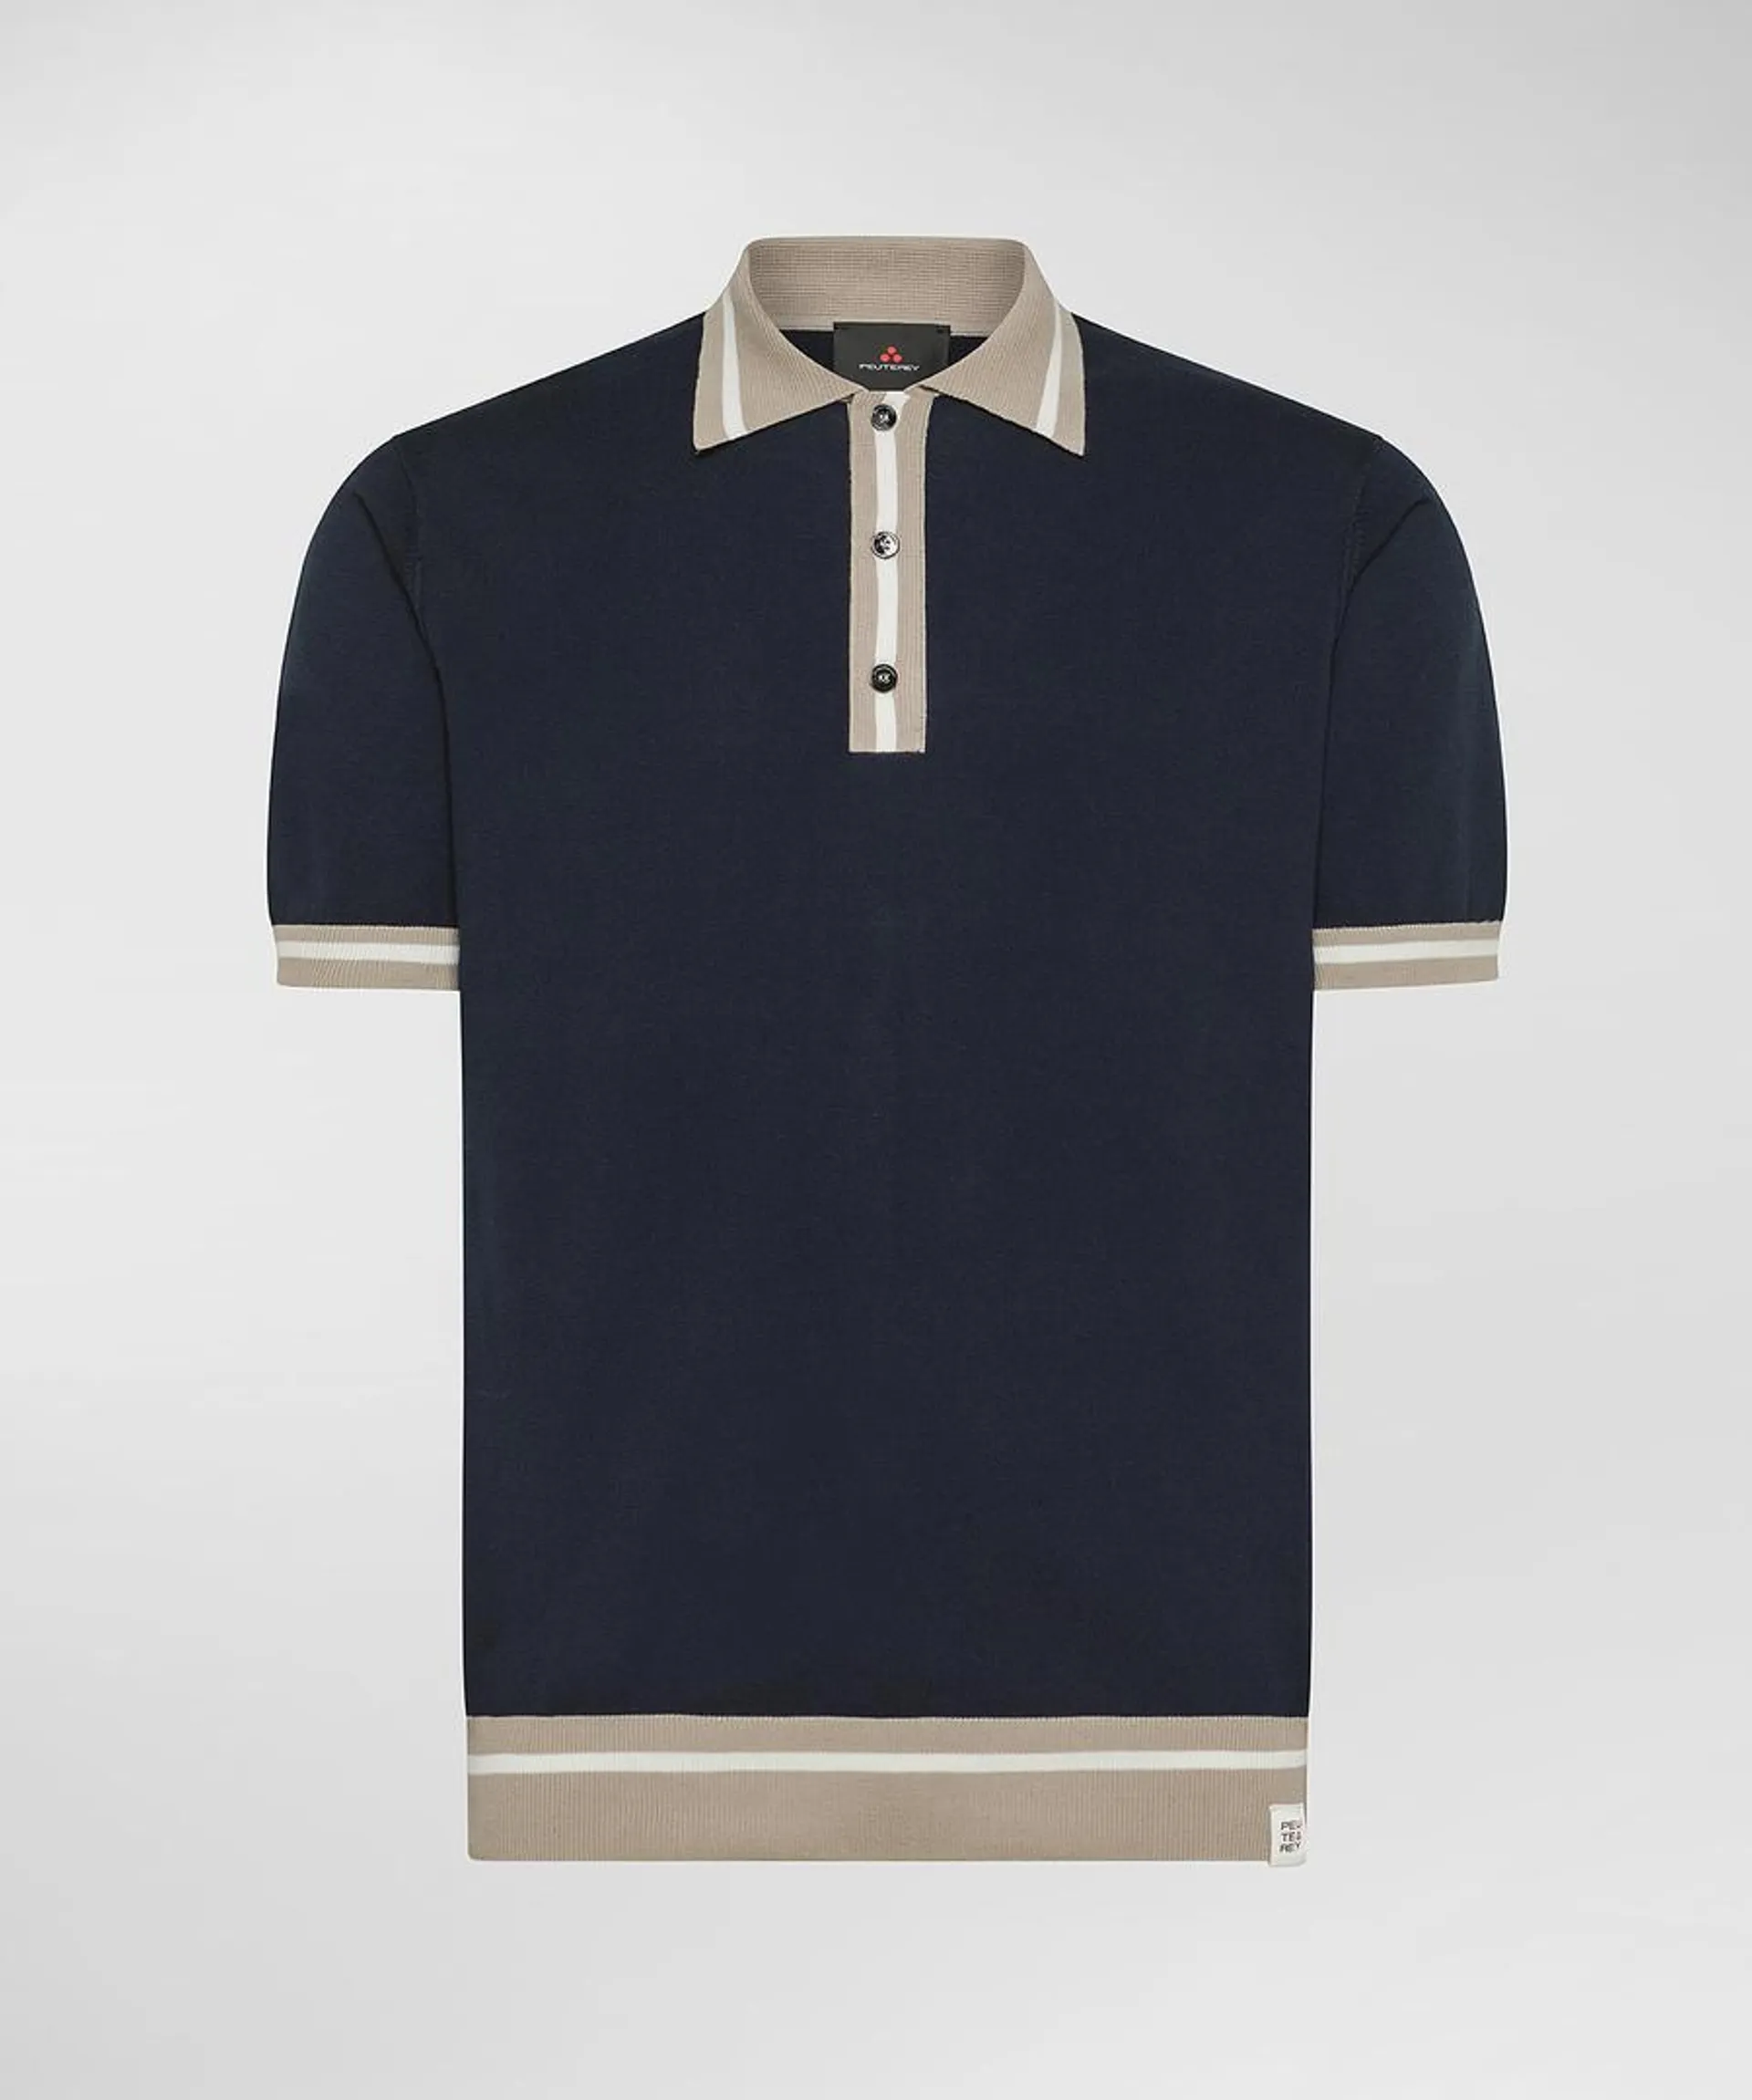 Cotton knit polo shirt with striped details